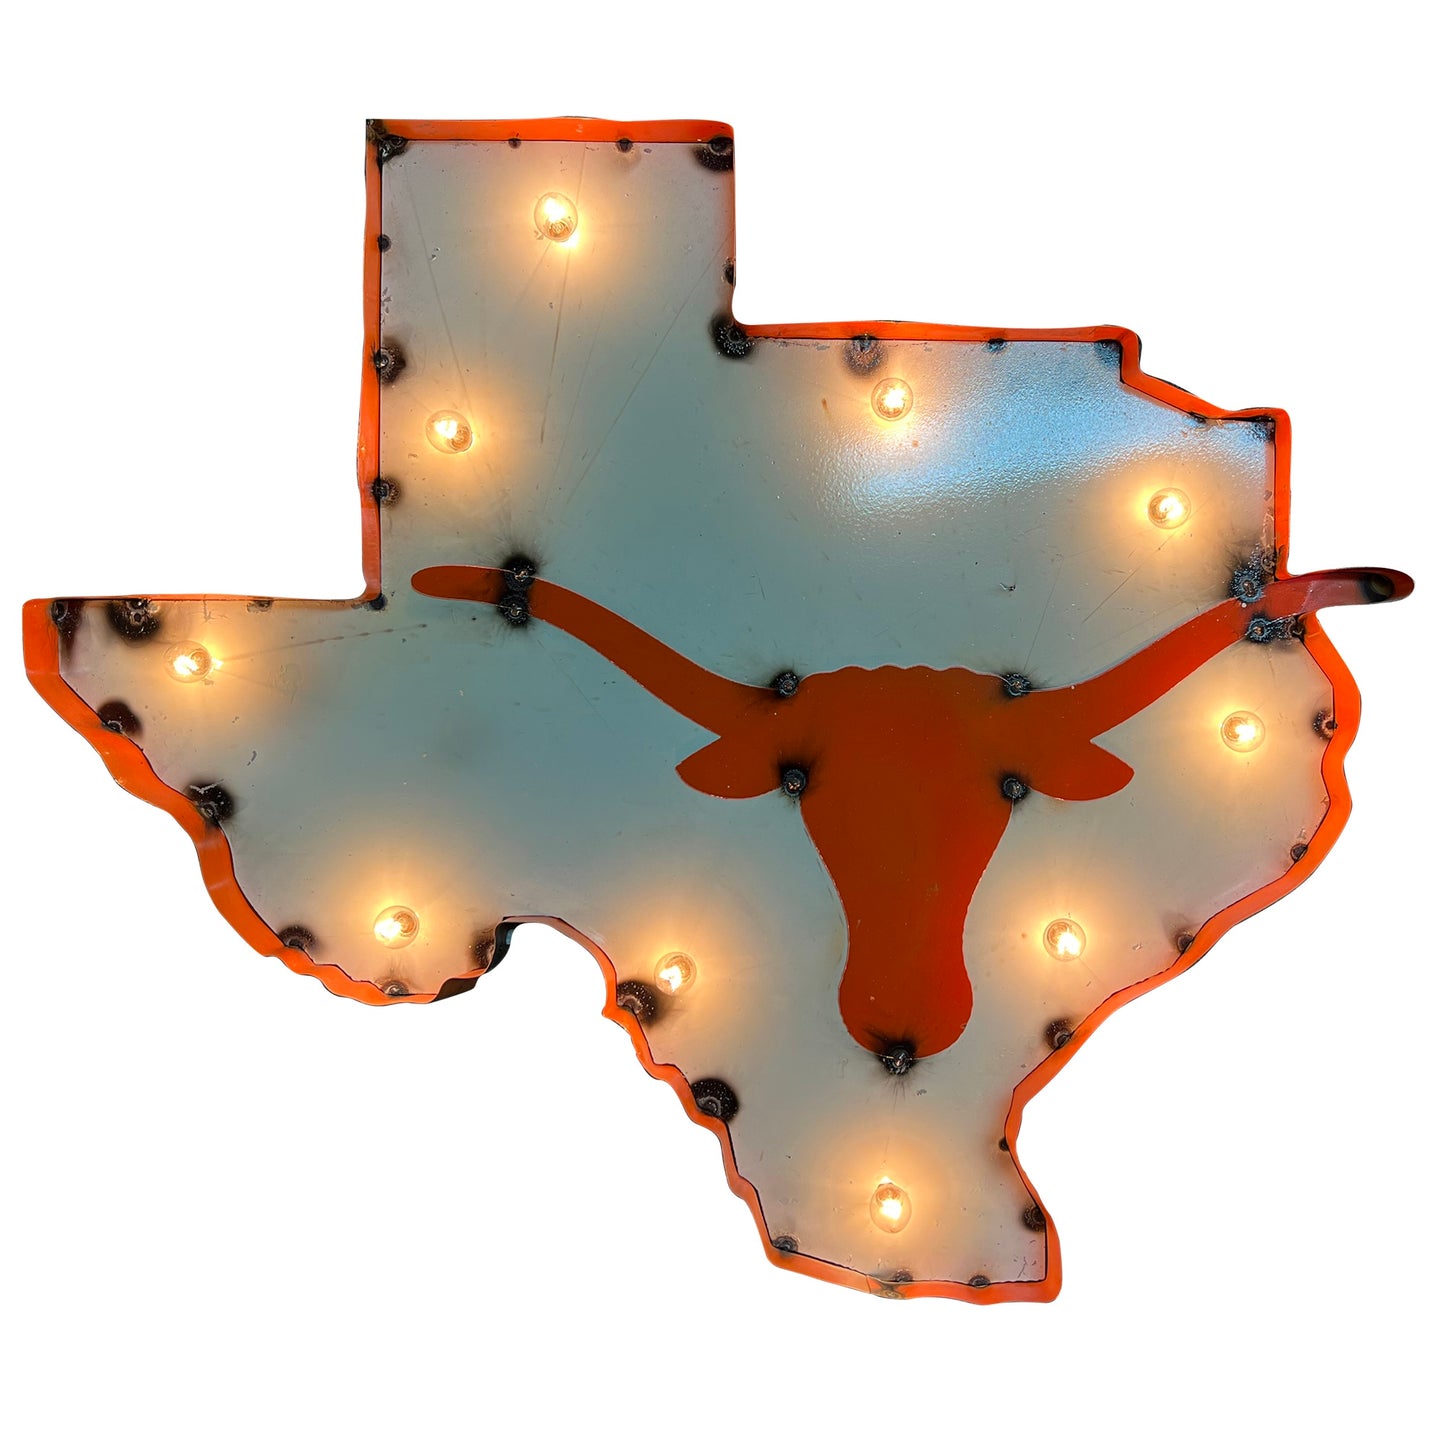 The University of Texas Illuminated Recycled Metal Wall Decor State Map